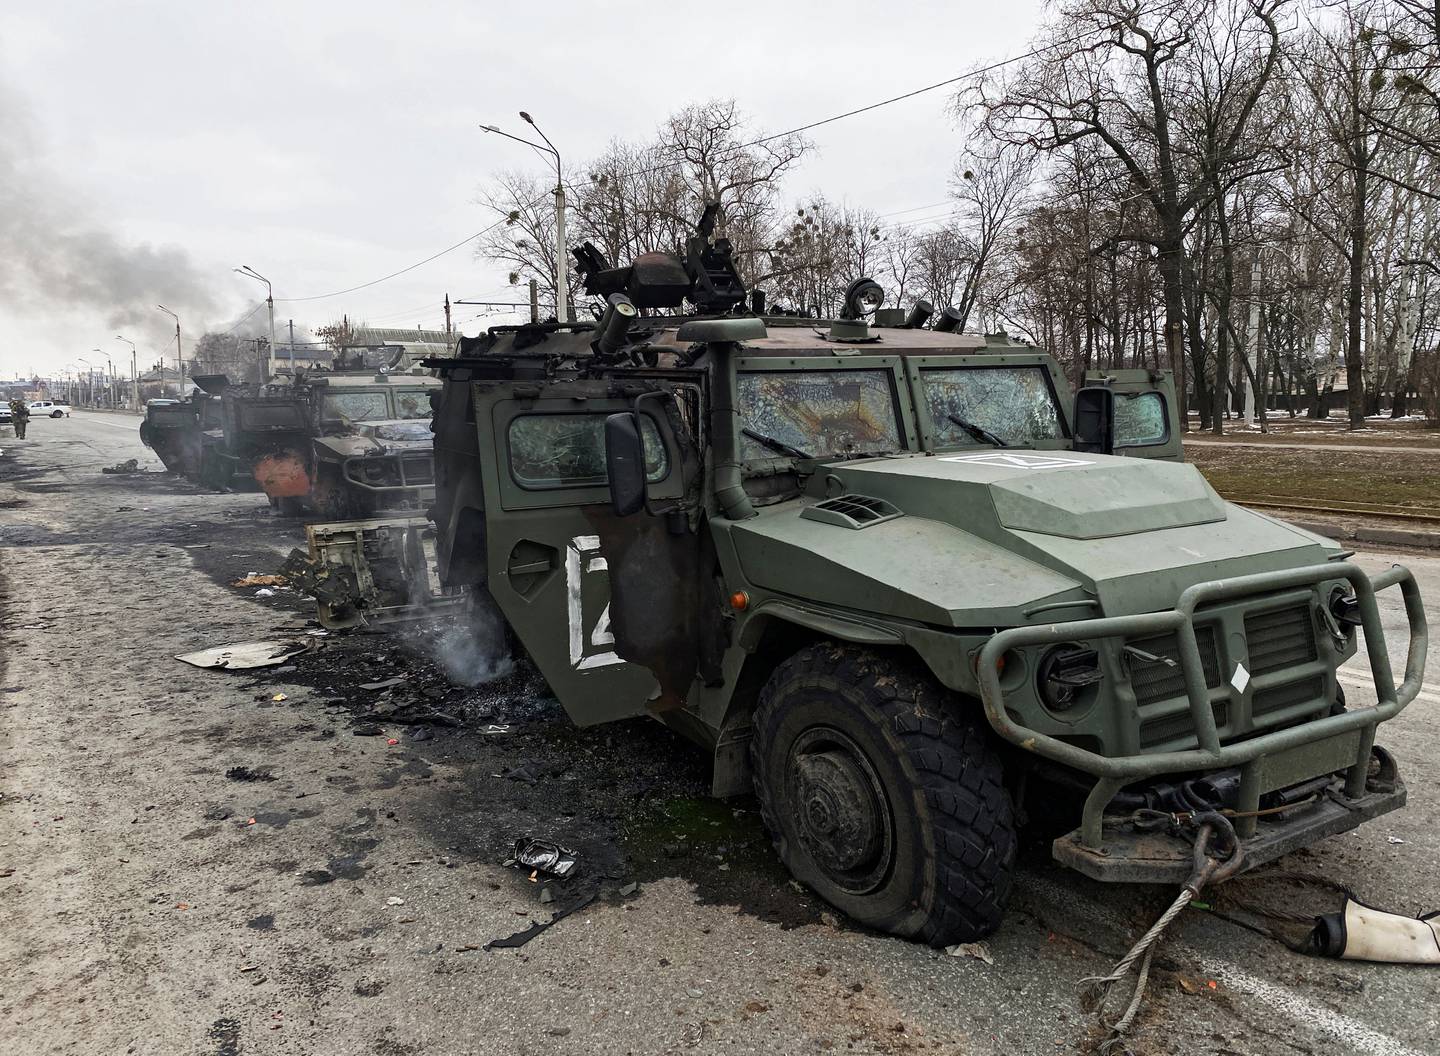 A destroyed Russian TIGR vehicle on a road in Kharkiv, Ukraine. Reuters